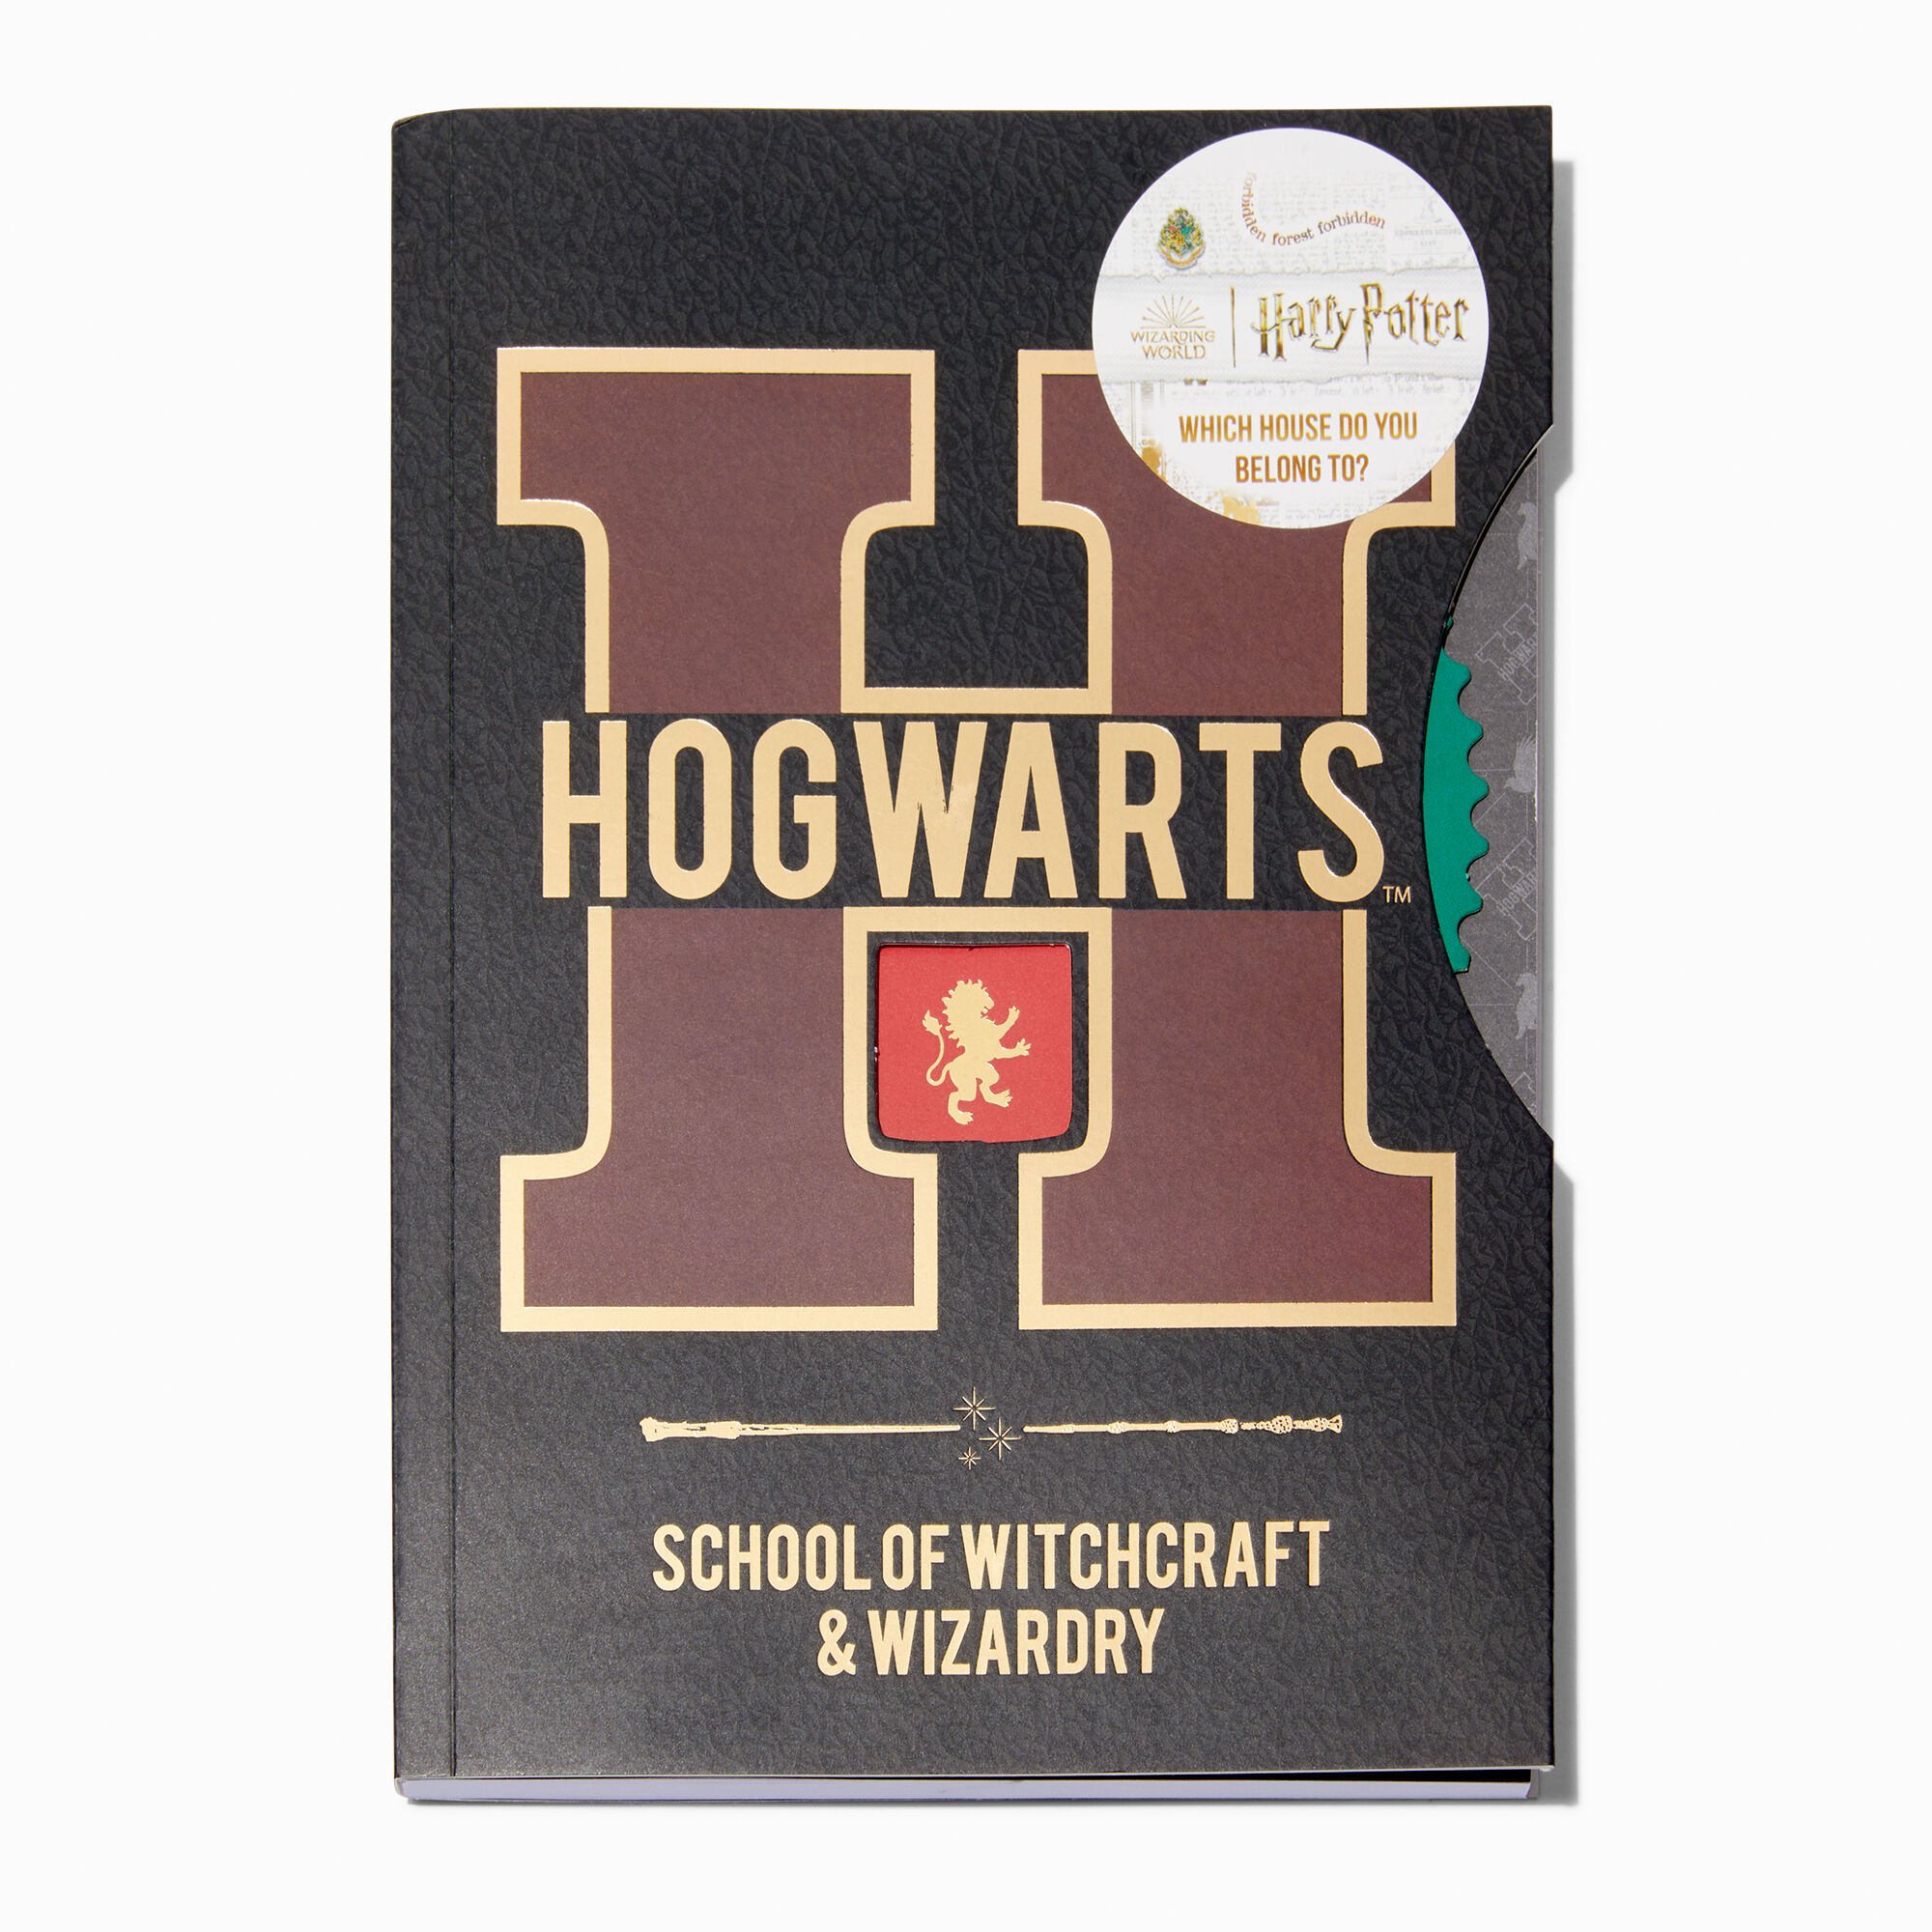 View Claires Harry Potter Hogwarts Notebook Black information